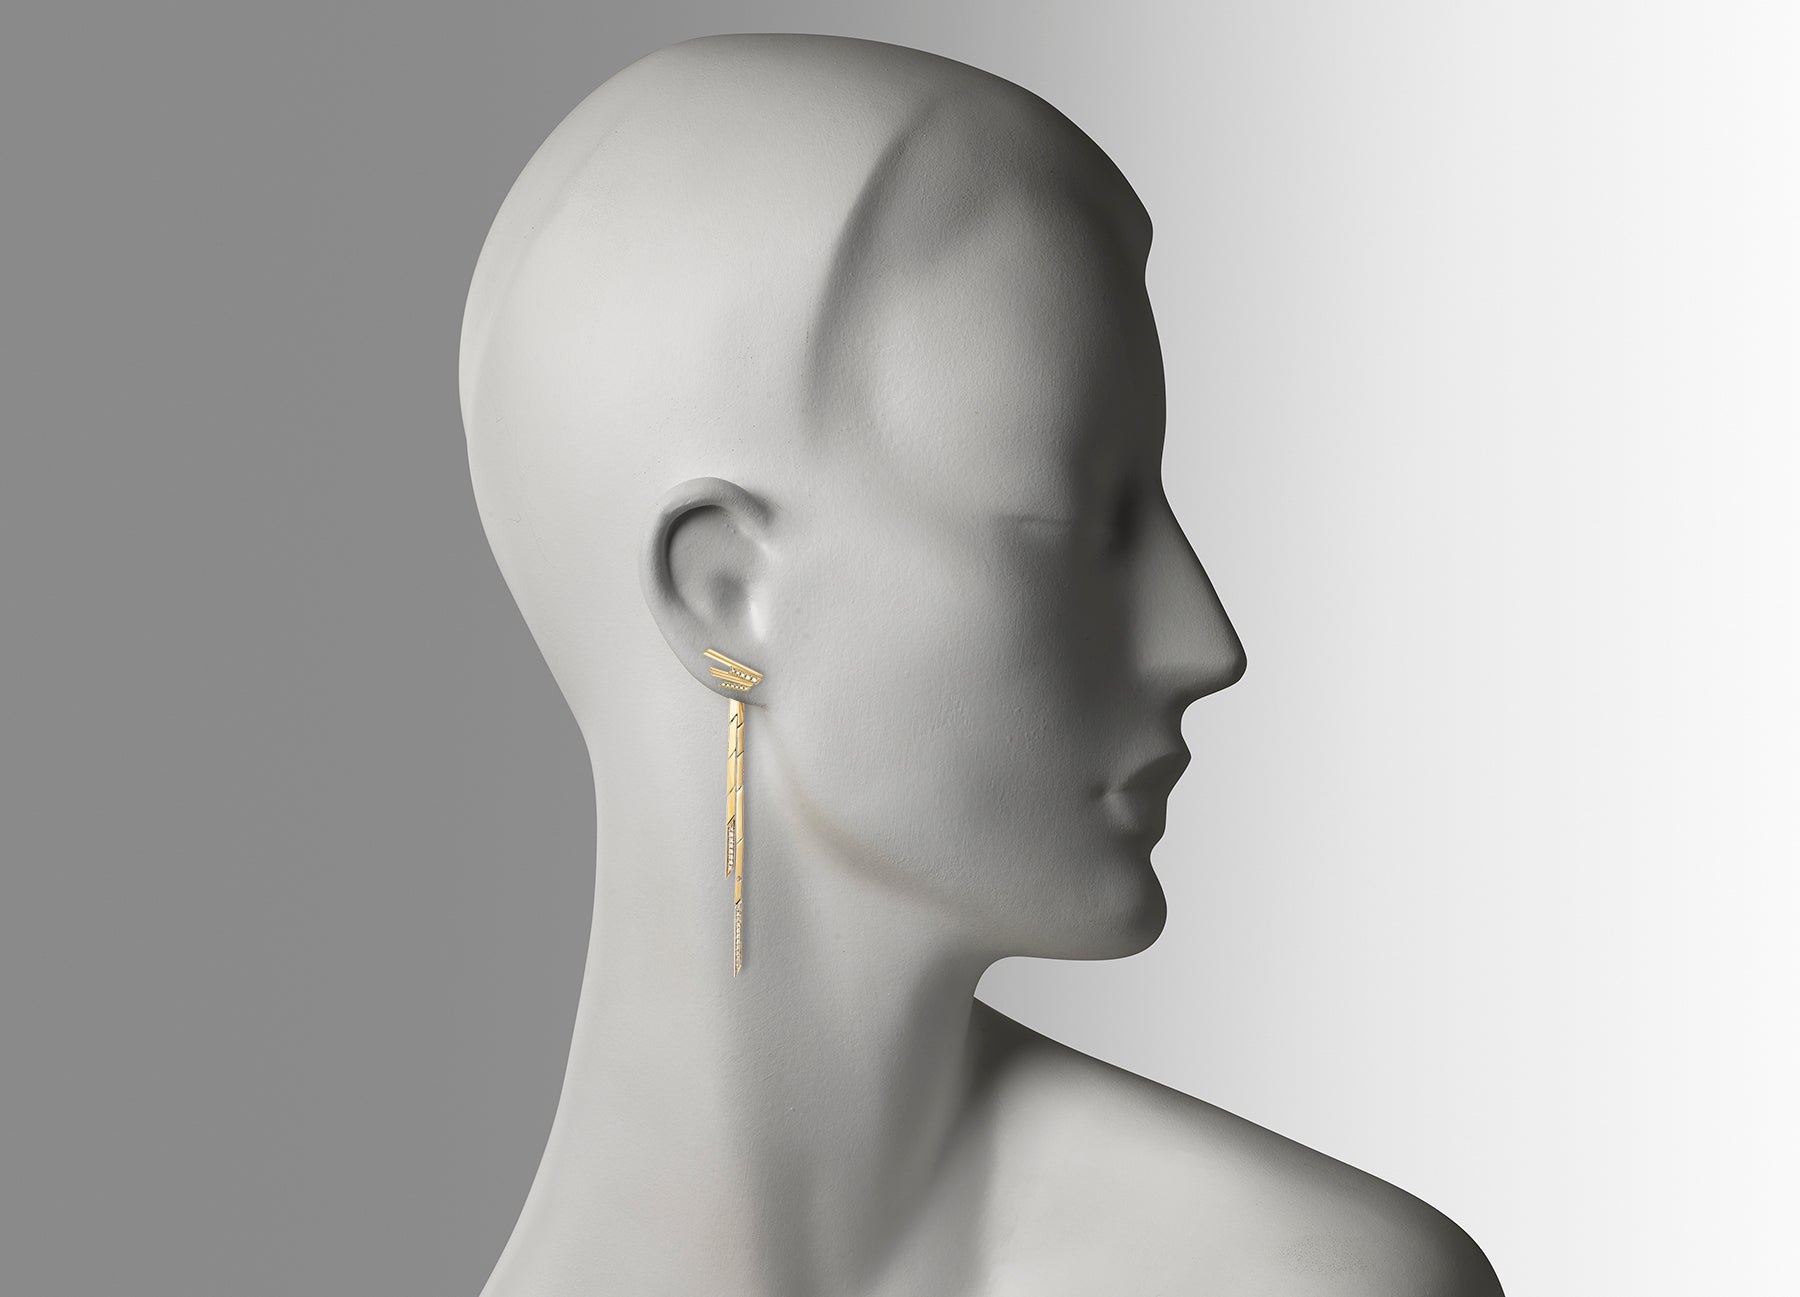  Mini Stellar Stud earrings with detachable drops in 18K yellow gold with white diamonds by Tomasz Donocik worn on mannequin